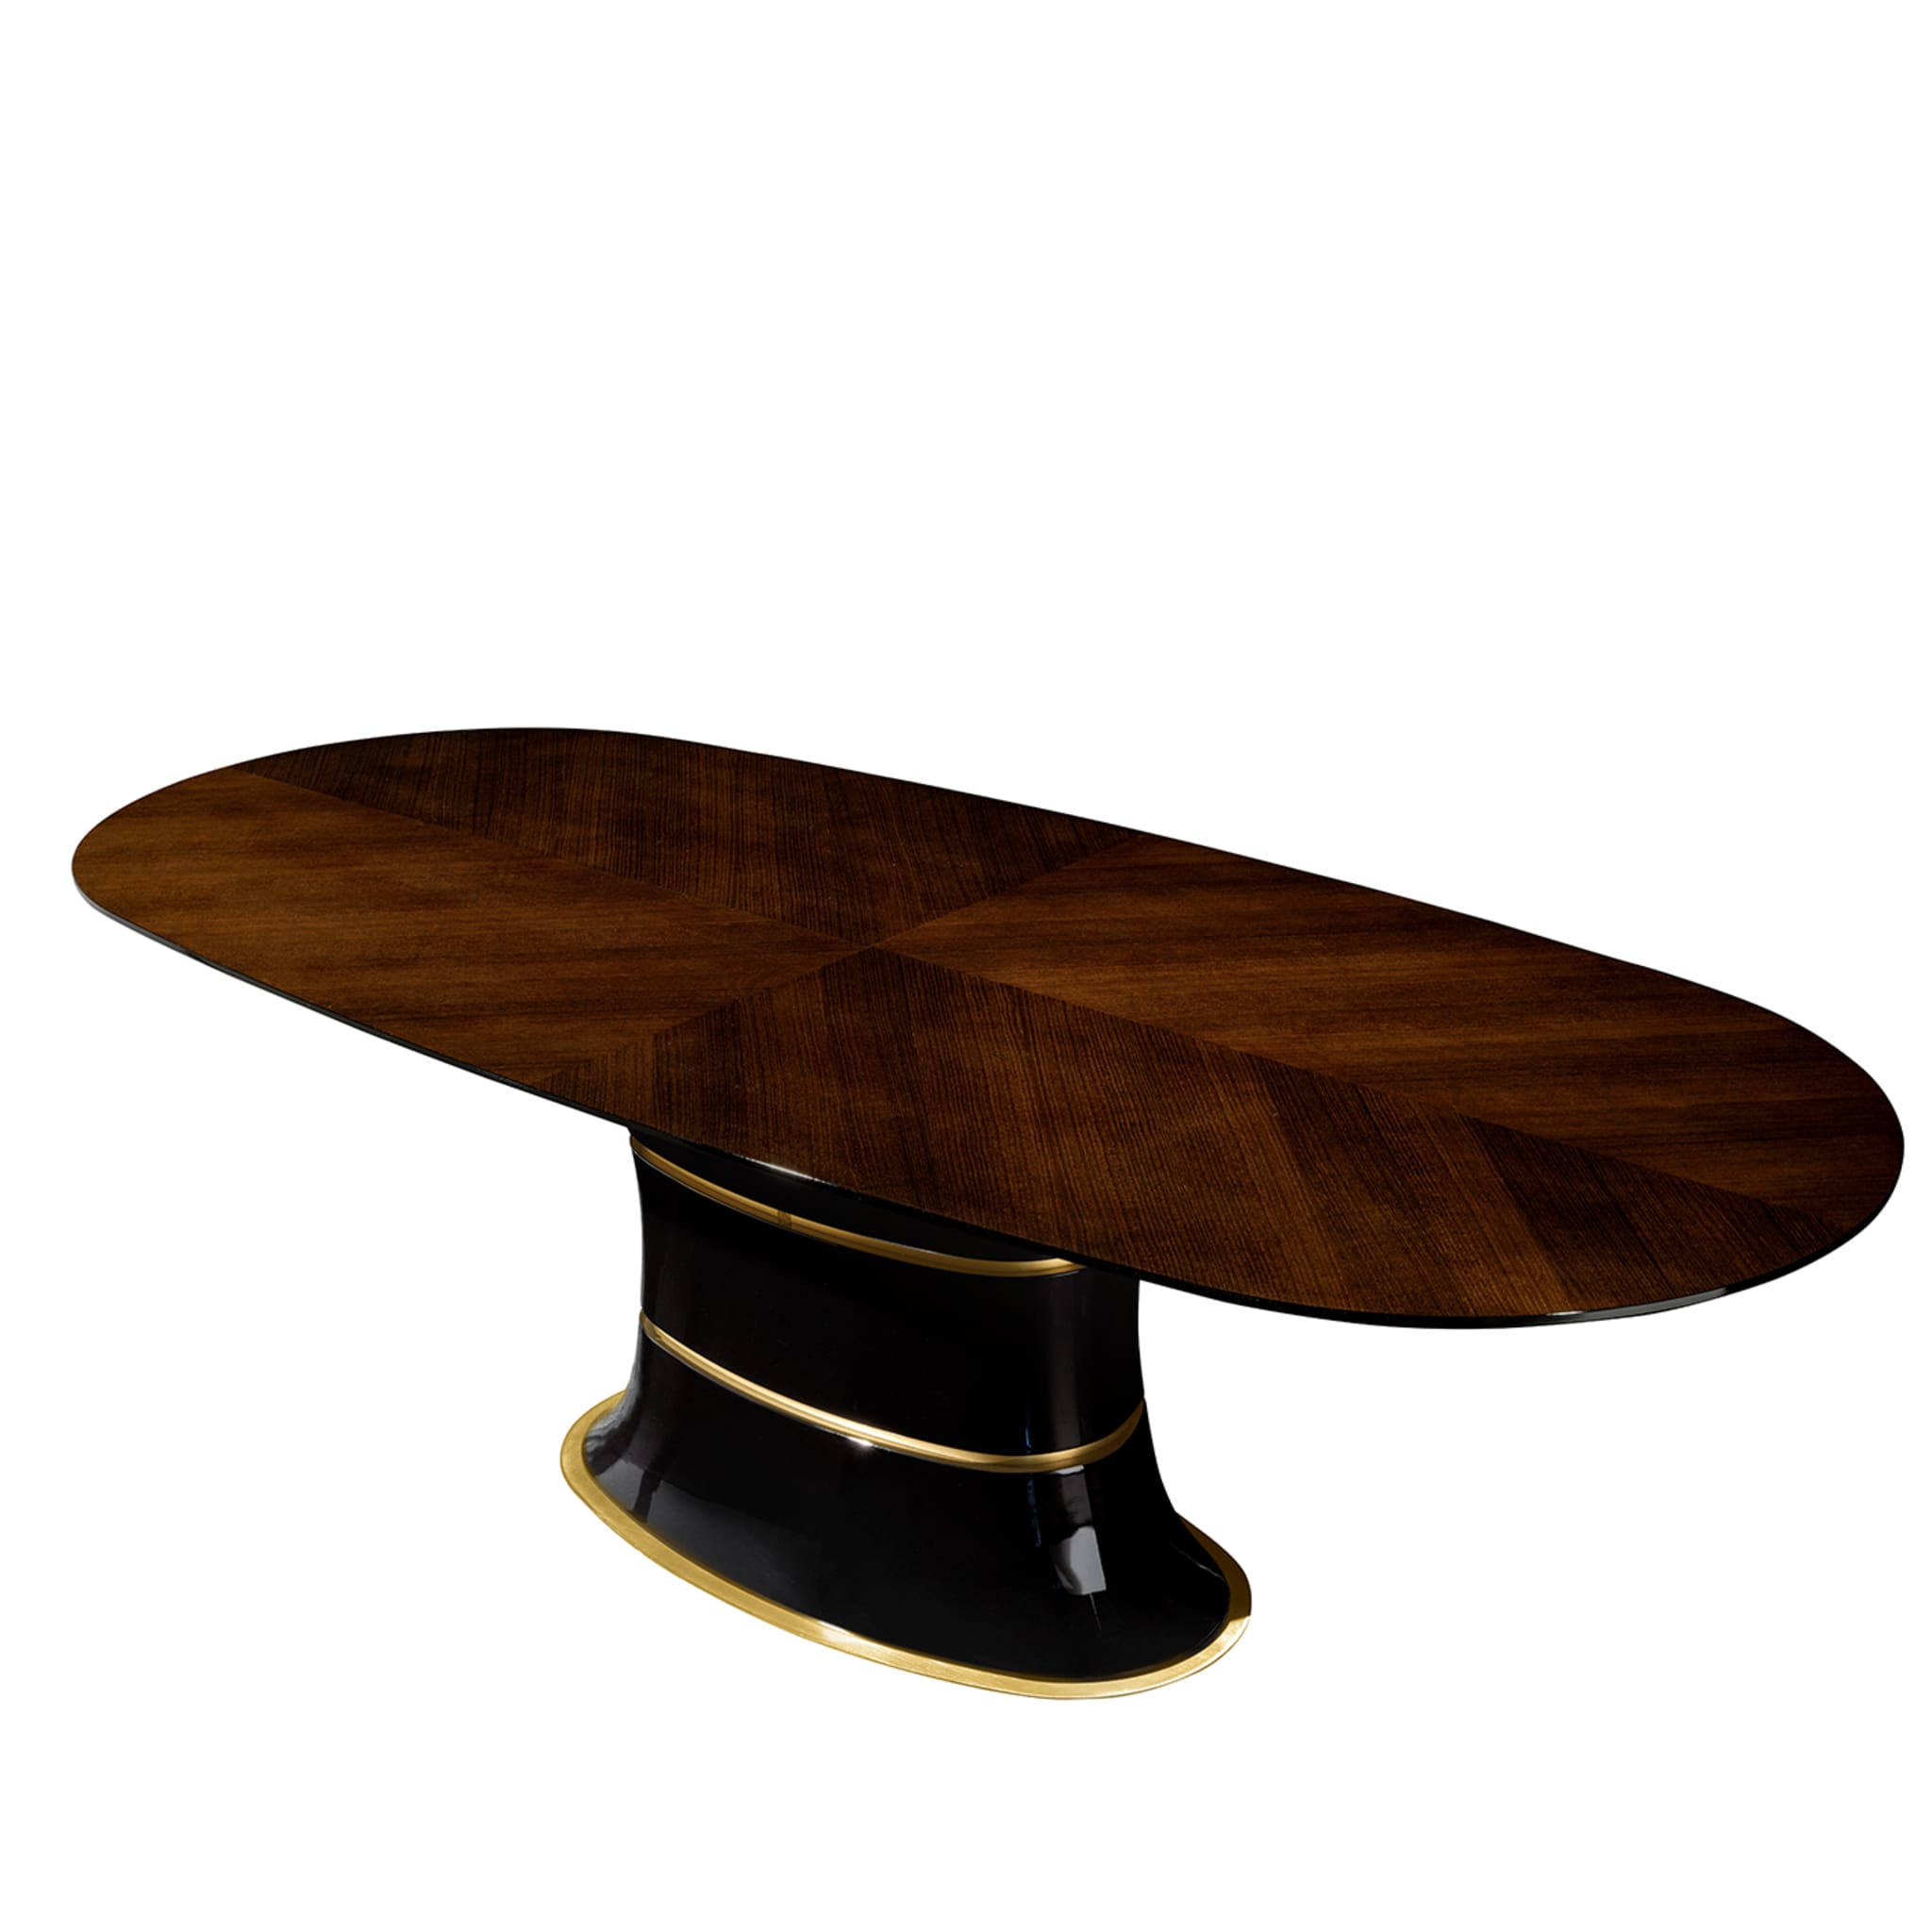 Victor Dark Oval Dining Table - Alternative view 1